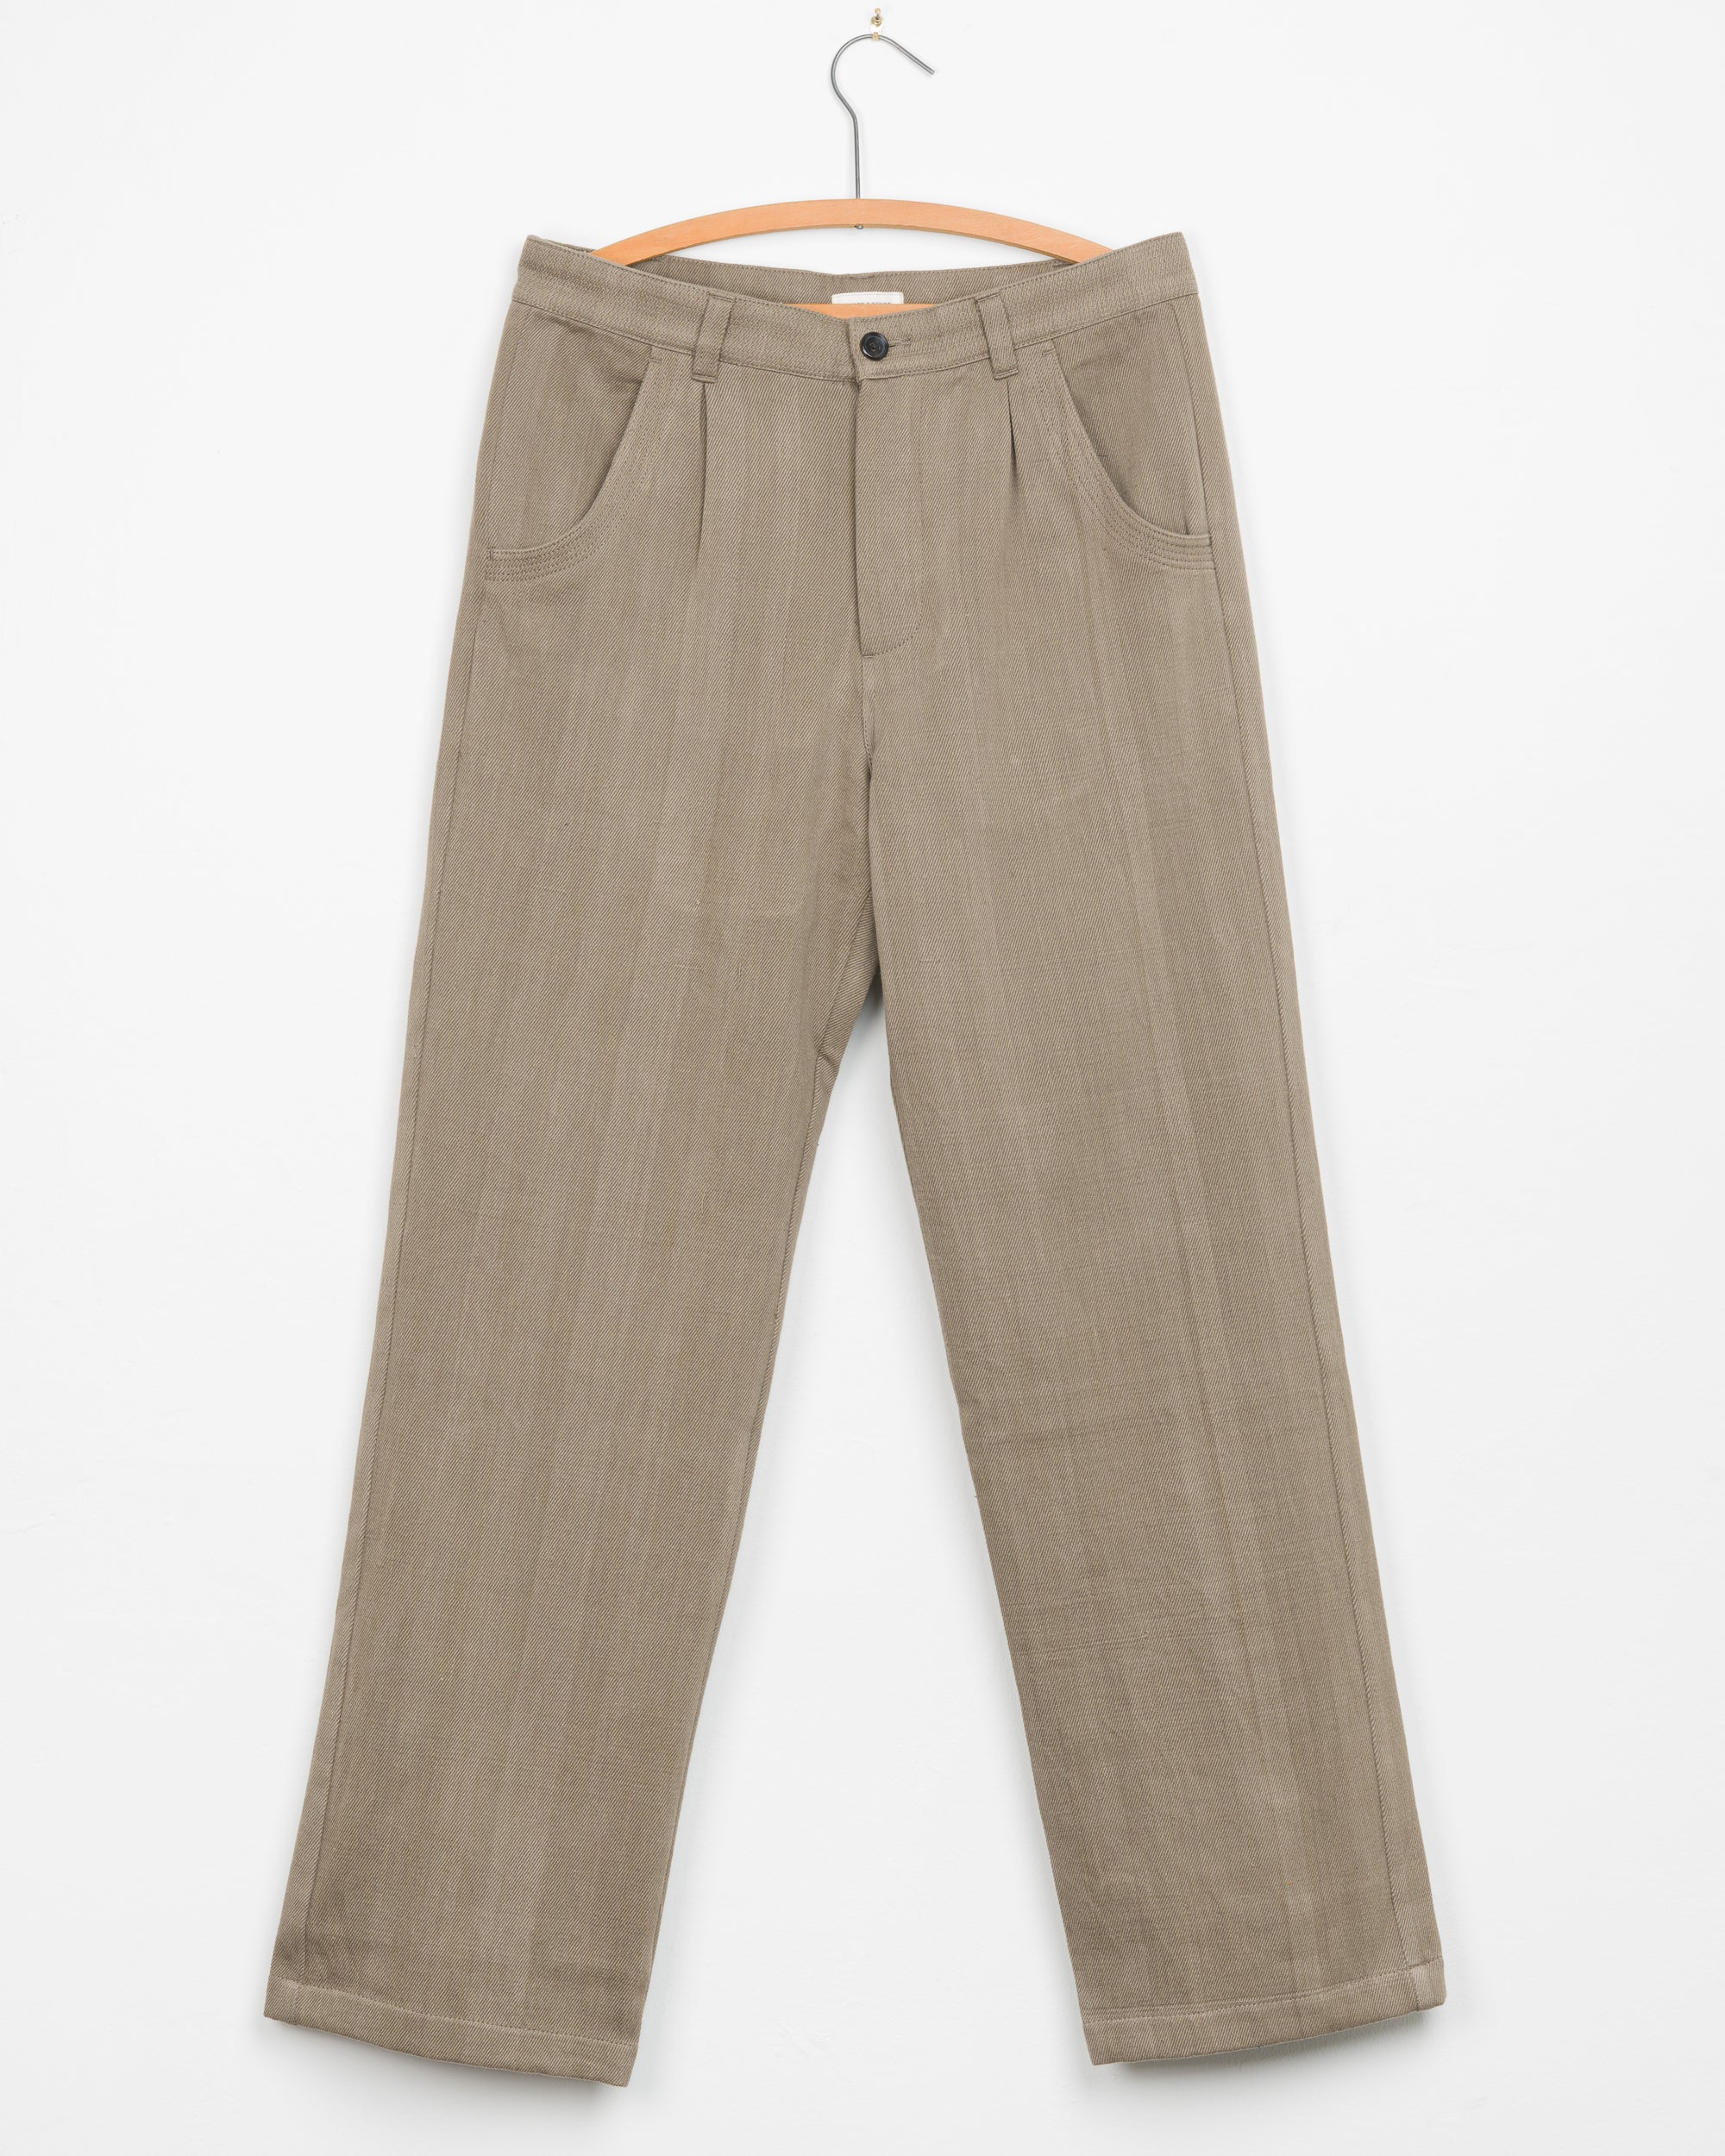 Veda Pant in Cement Twill